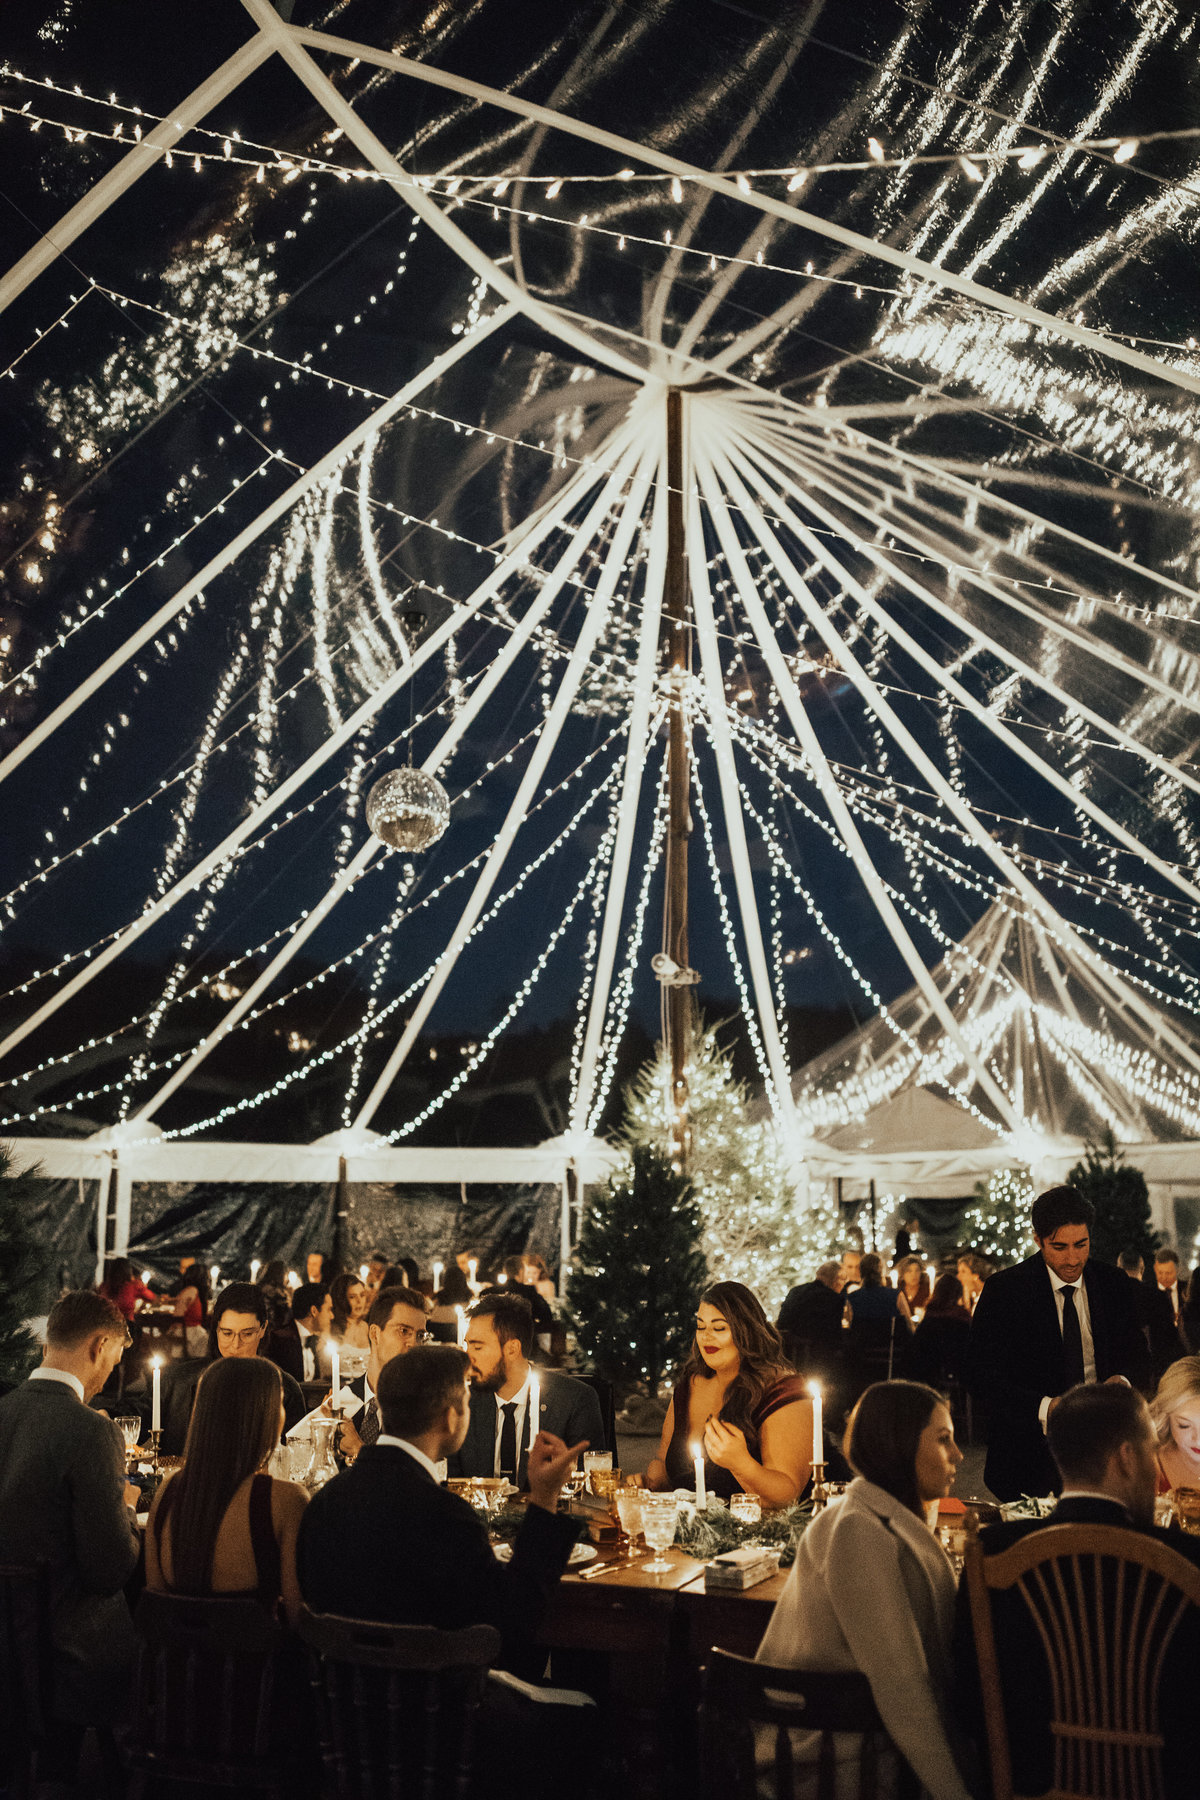 Christy-l-Johnston-Photography-Monica-Relyea-Events-Noelle-Downing-Instagram-Noelle_s-Favorite-Day-Wedding-Battenfelds-Christmas-tree-farm-Red-Hook-New-York-Hudson-Valley-upstate-november-2019-AP1A9572